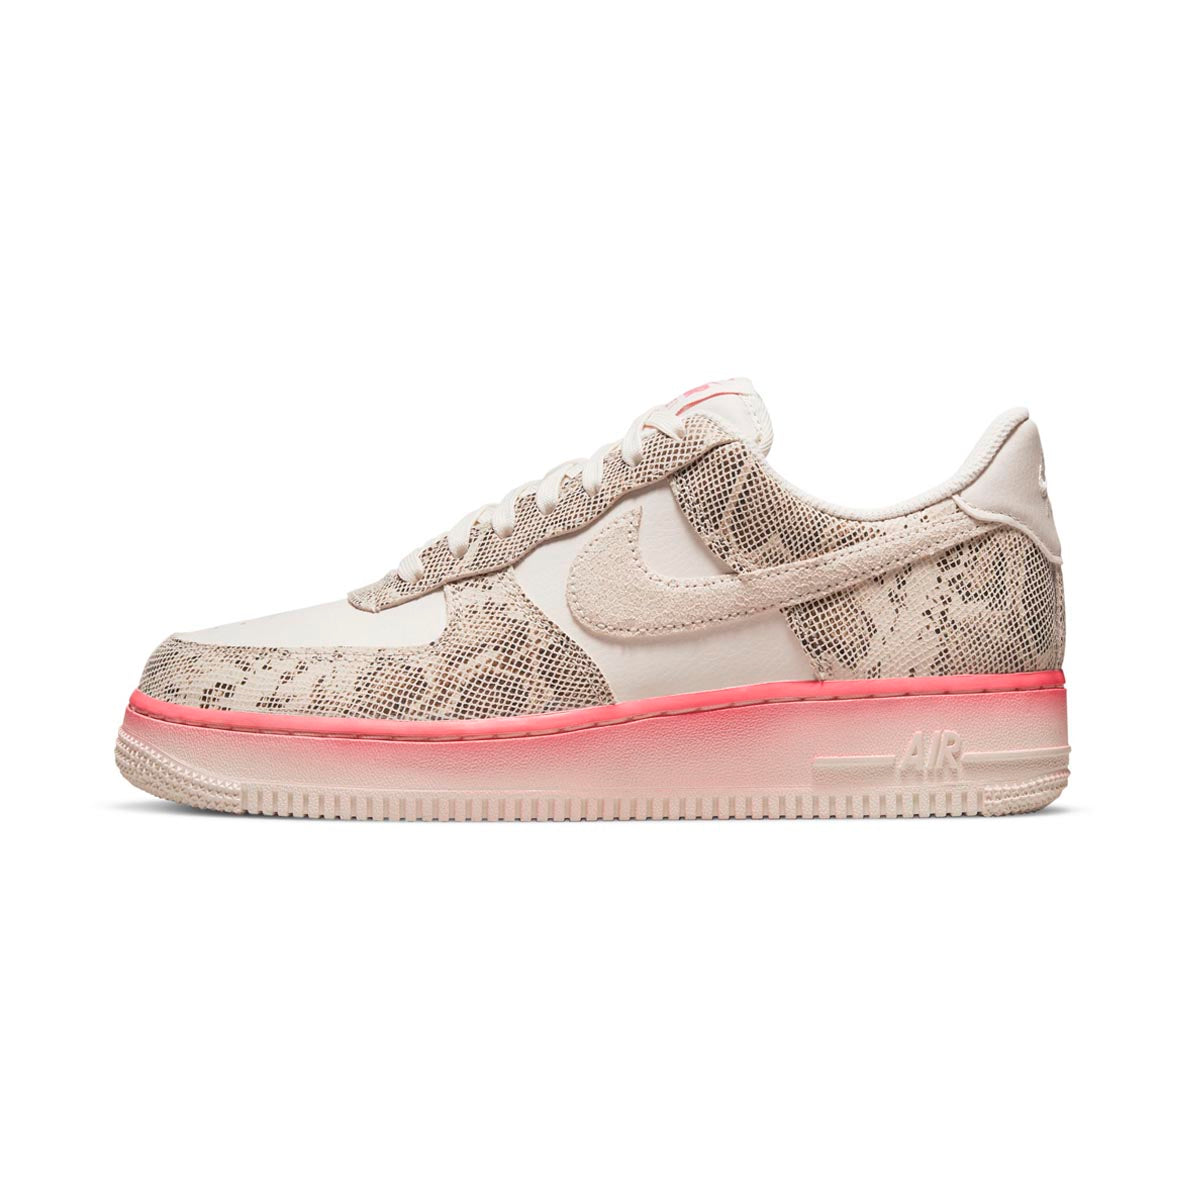 Nike Air Force 1 '07 LX - SoleFly